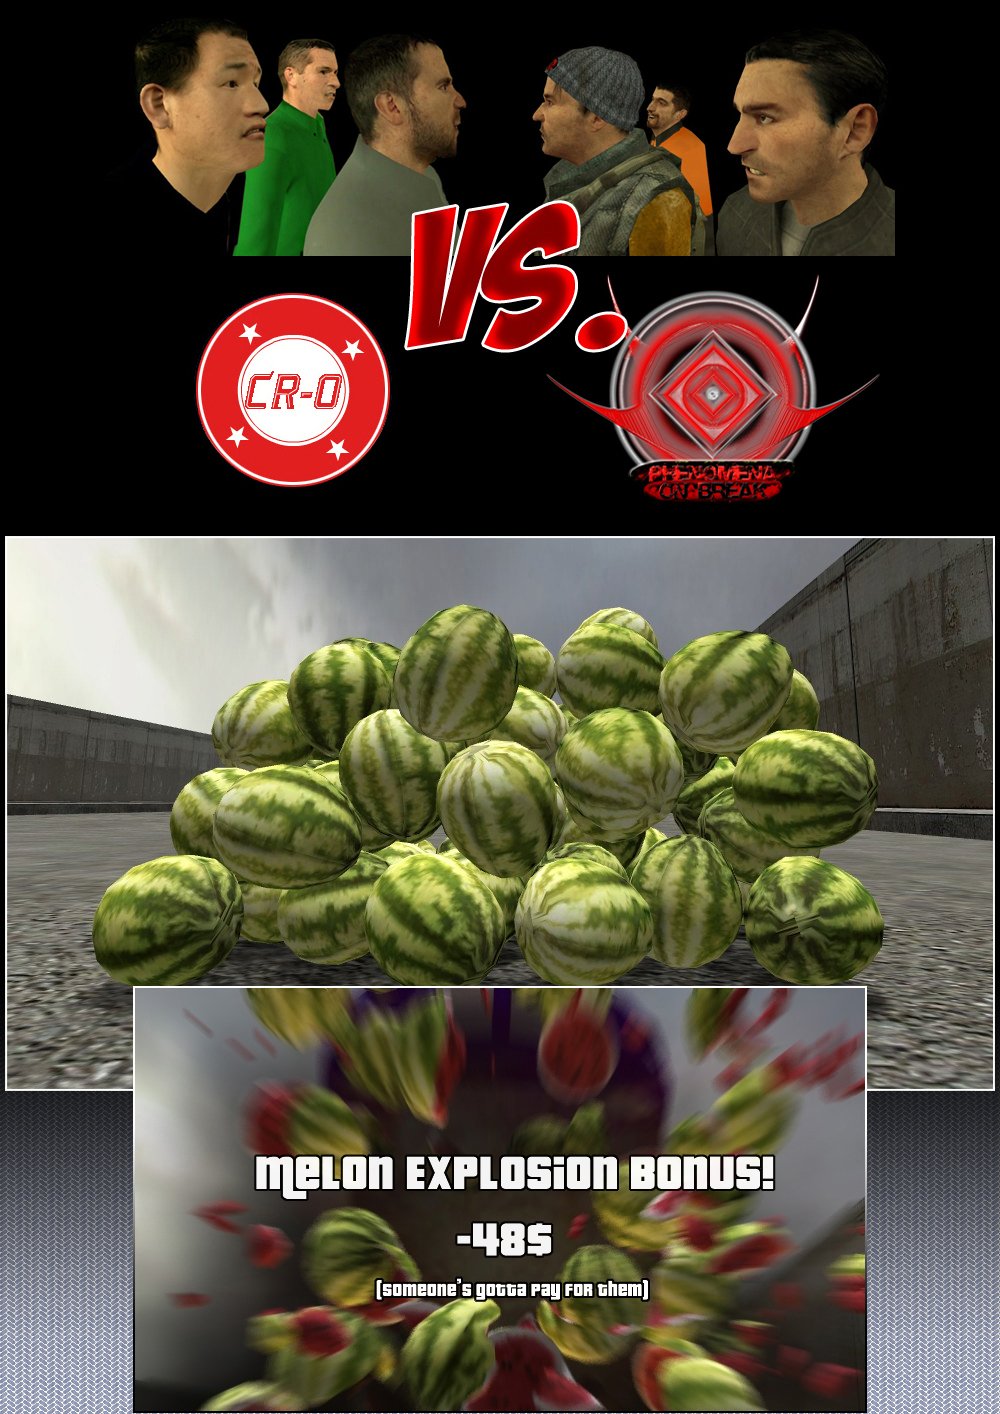 A bunch of melons are lying on the highway for some reason. Suddenly, a car runs into them, destroying the melons, as a videogame-style message pops up declaring a melon explosion bonus of negative 48 dollars, because someone has to pay for them.